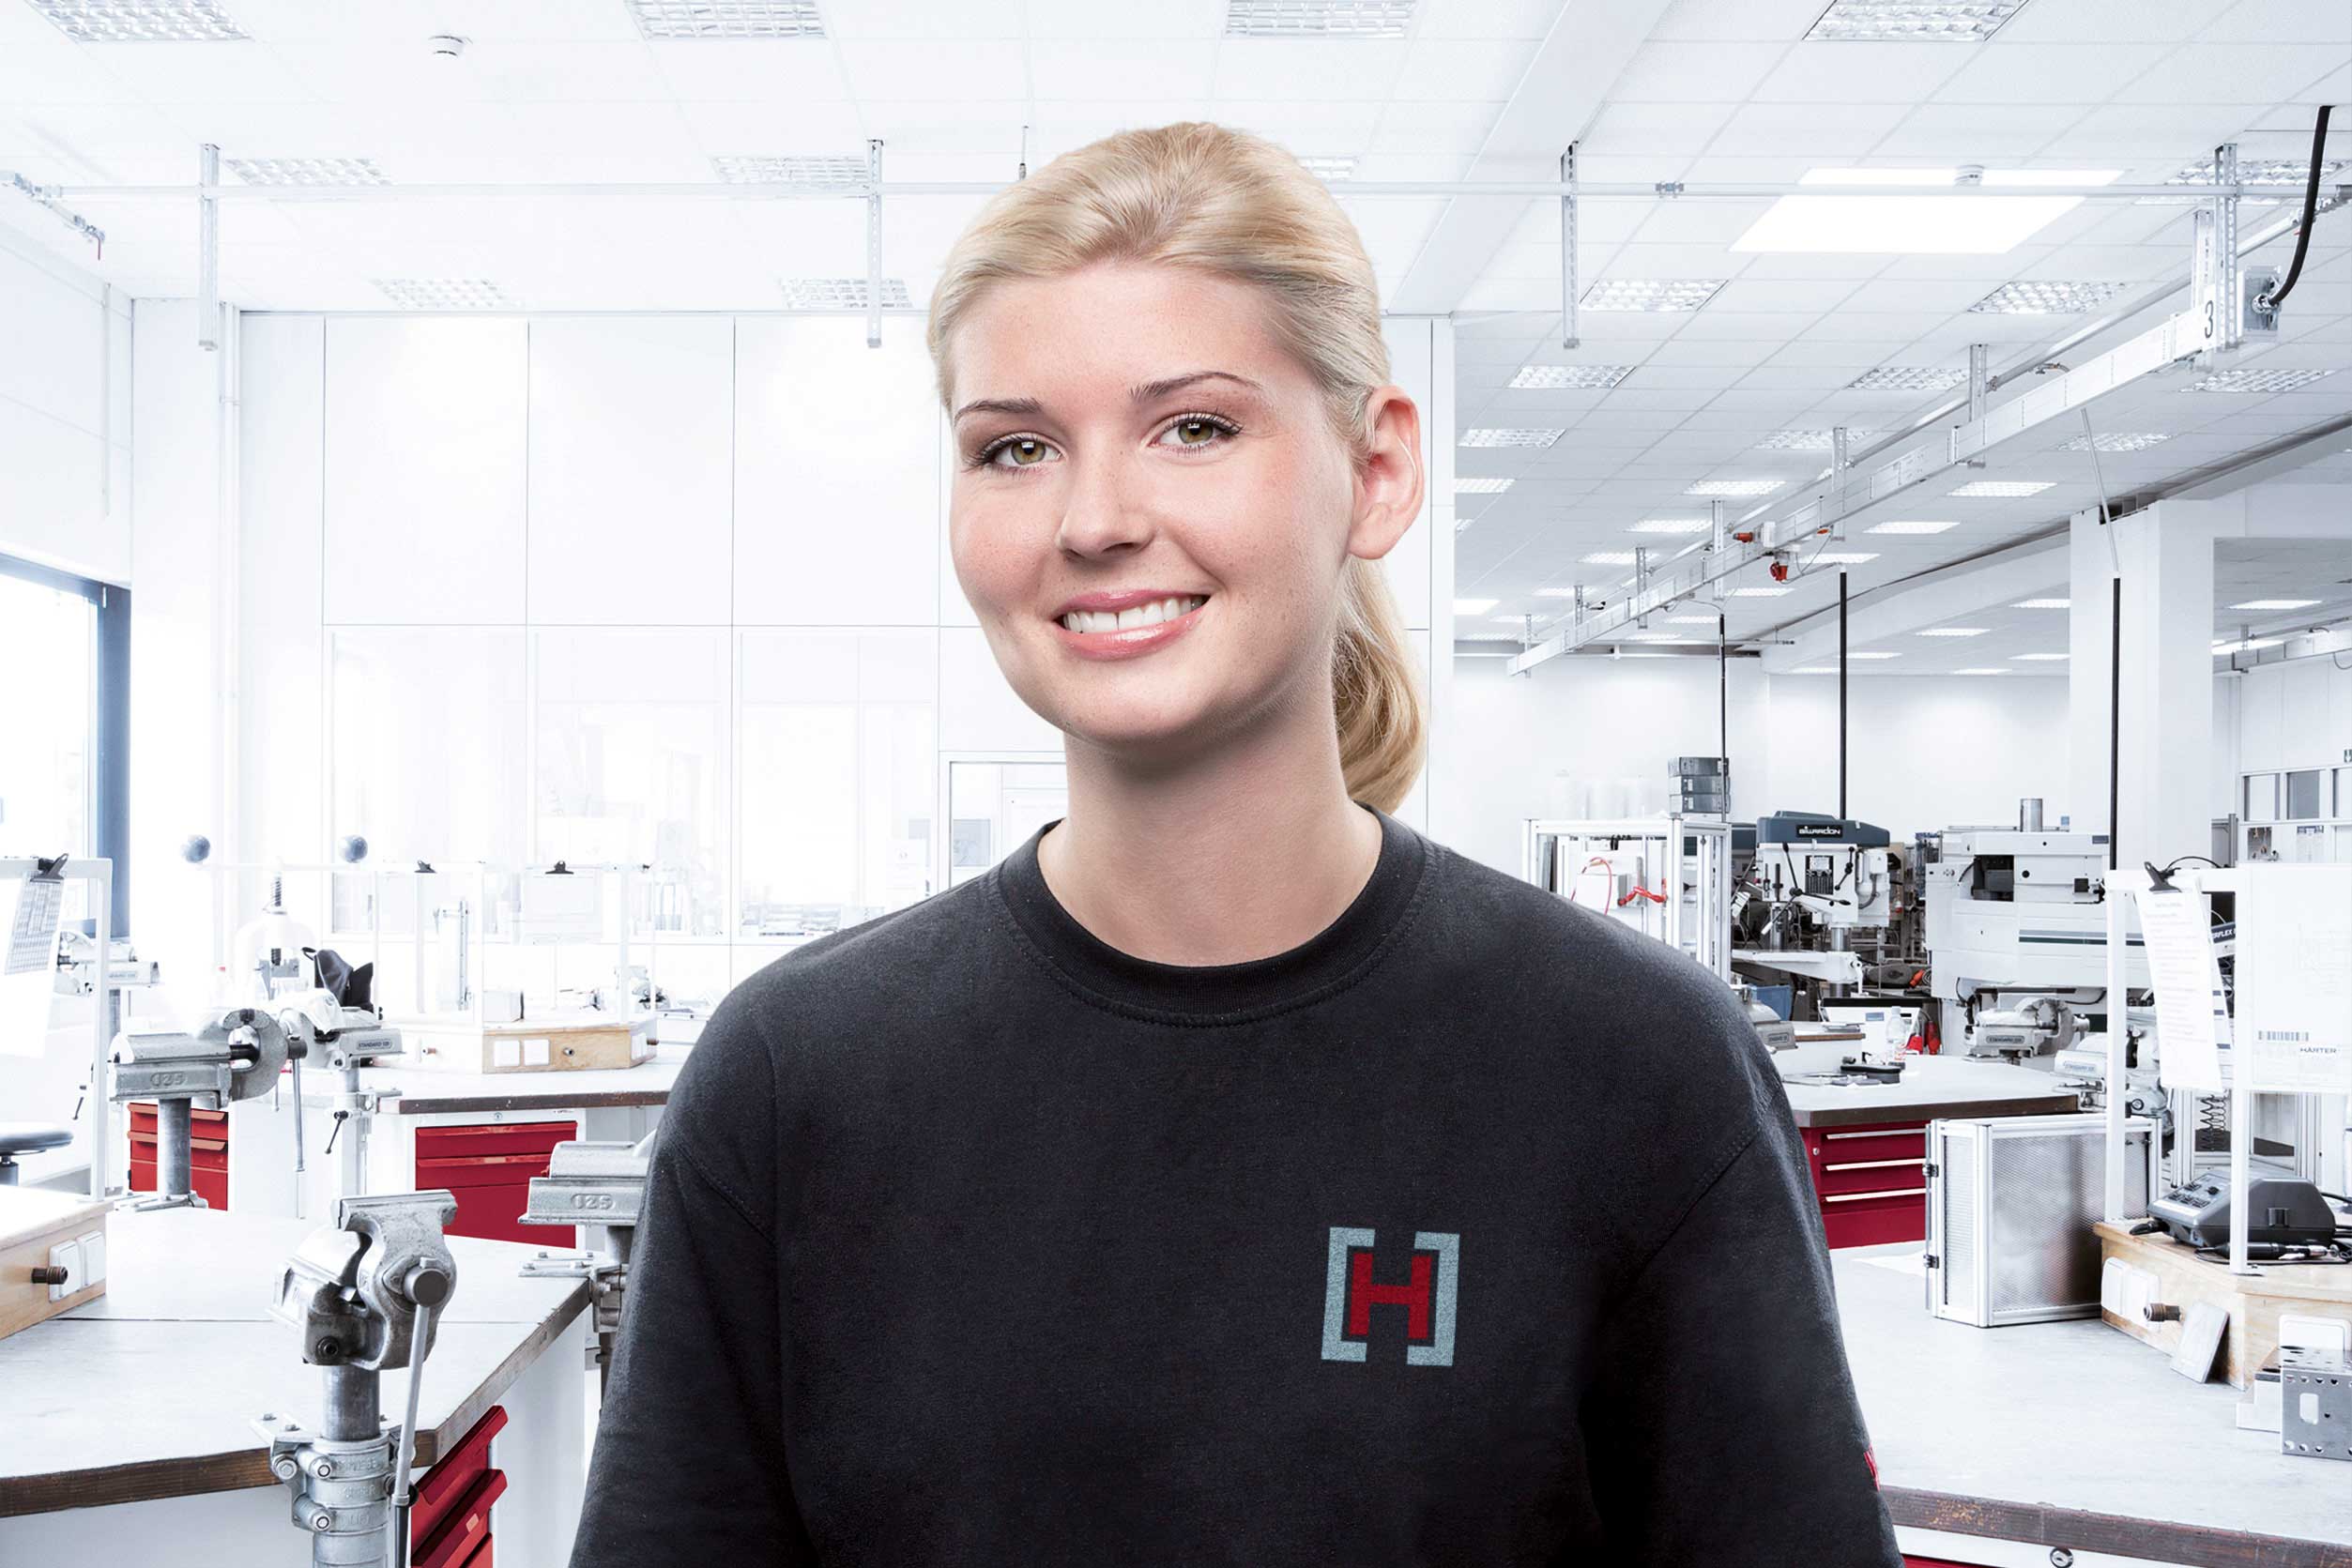 Nadja Knötig, trainee at HÄRTER Werkzeugbau: “At special seminars for trainees, we practise learning and working techniques.”